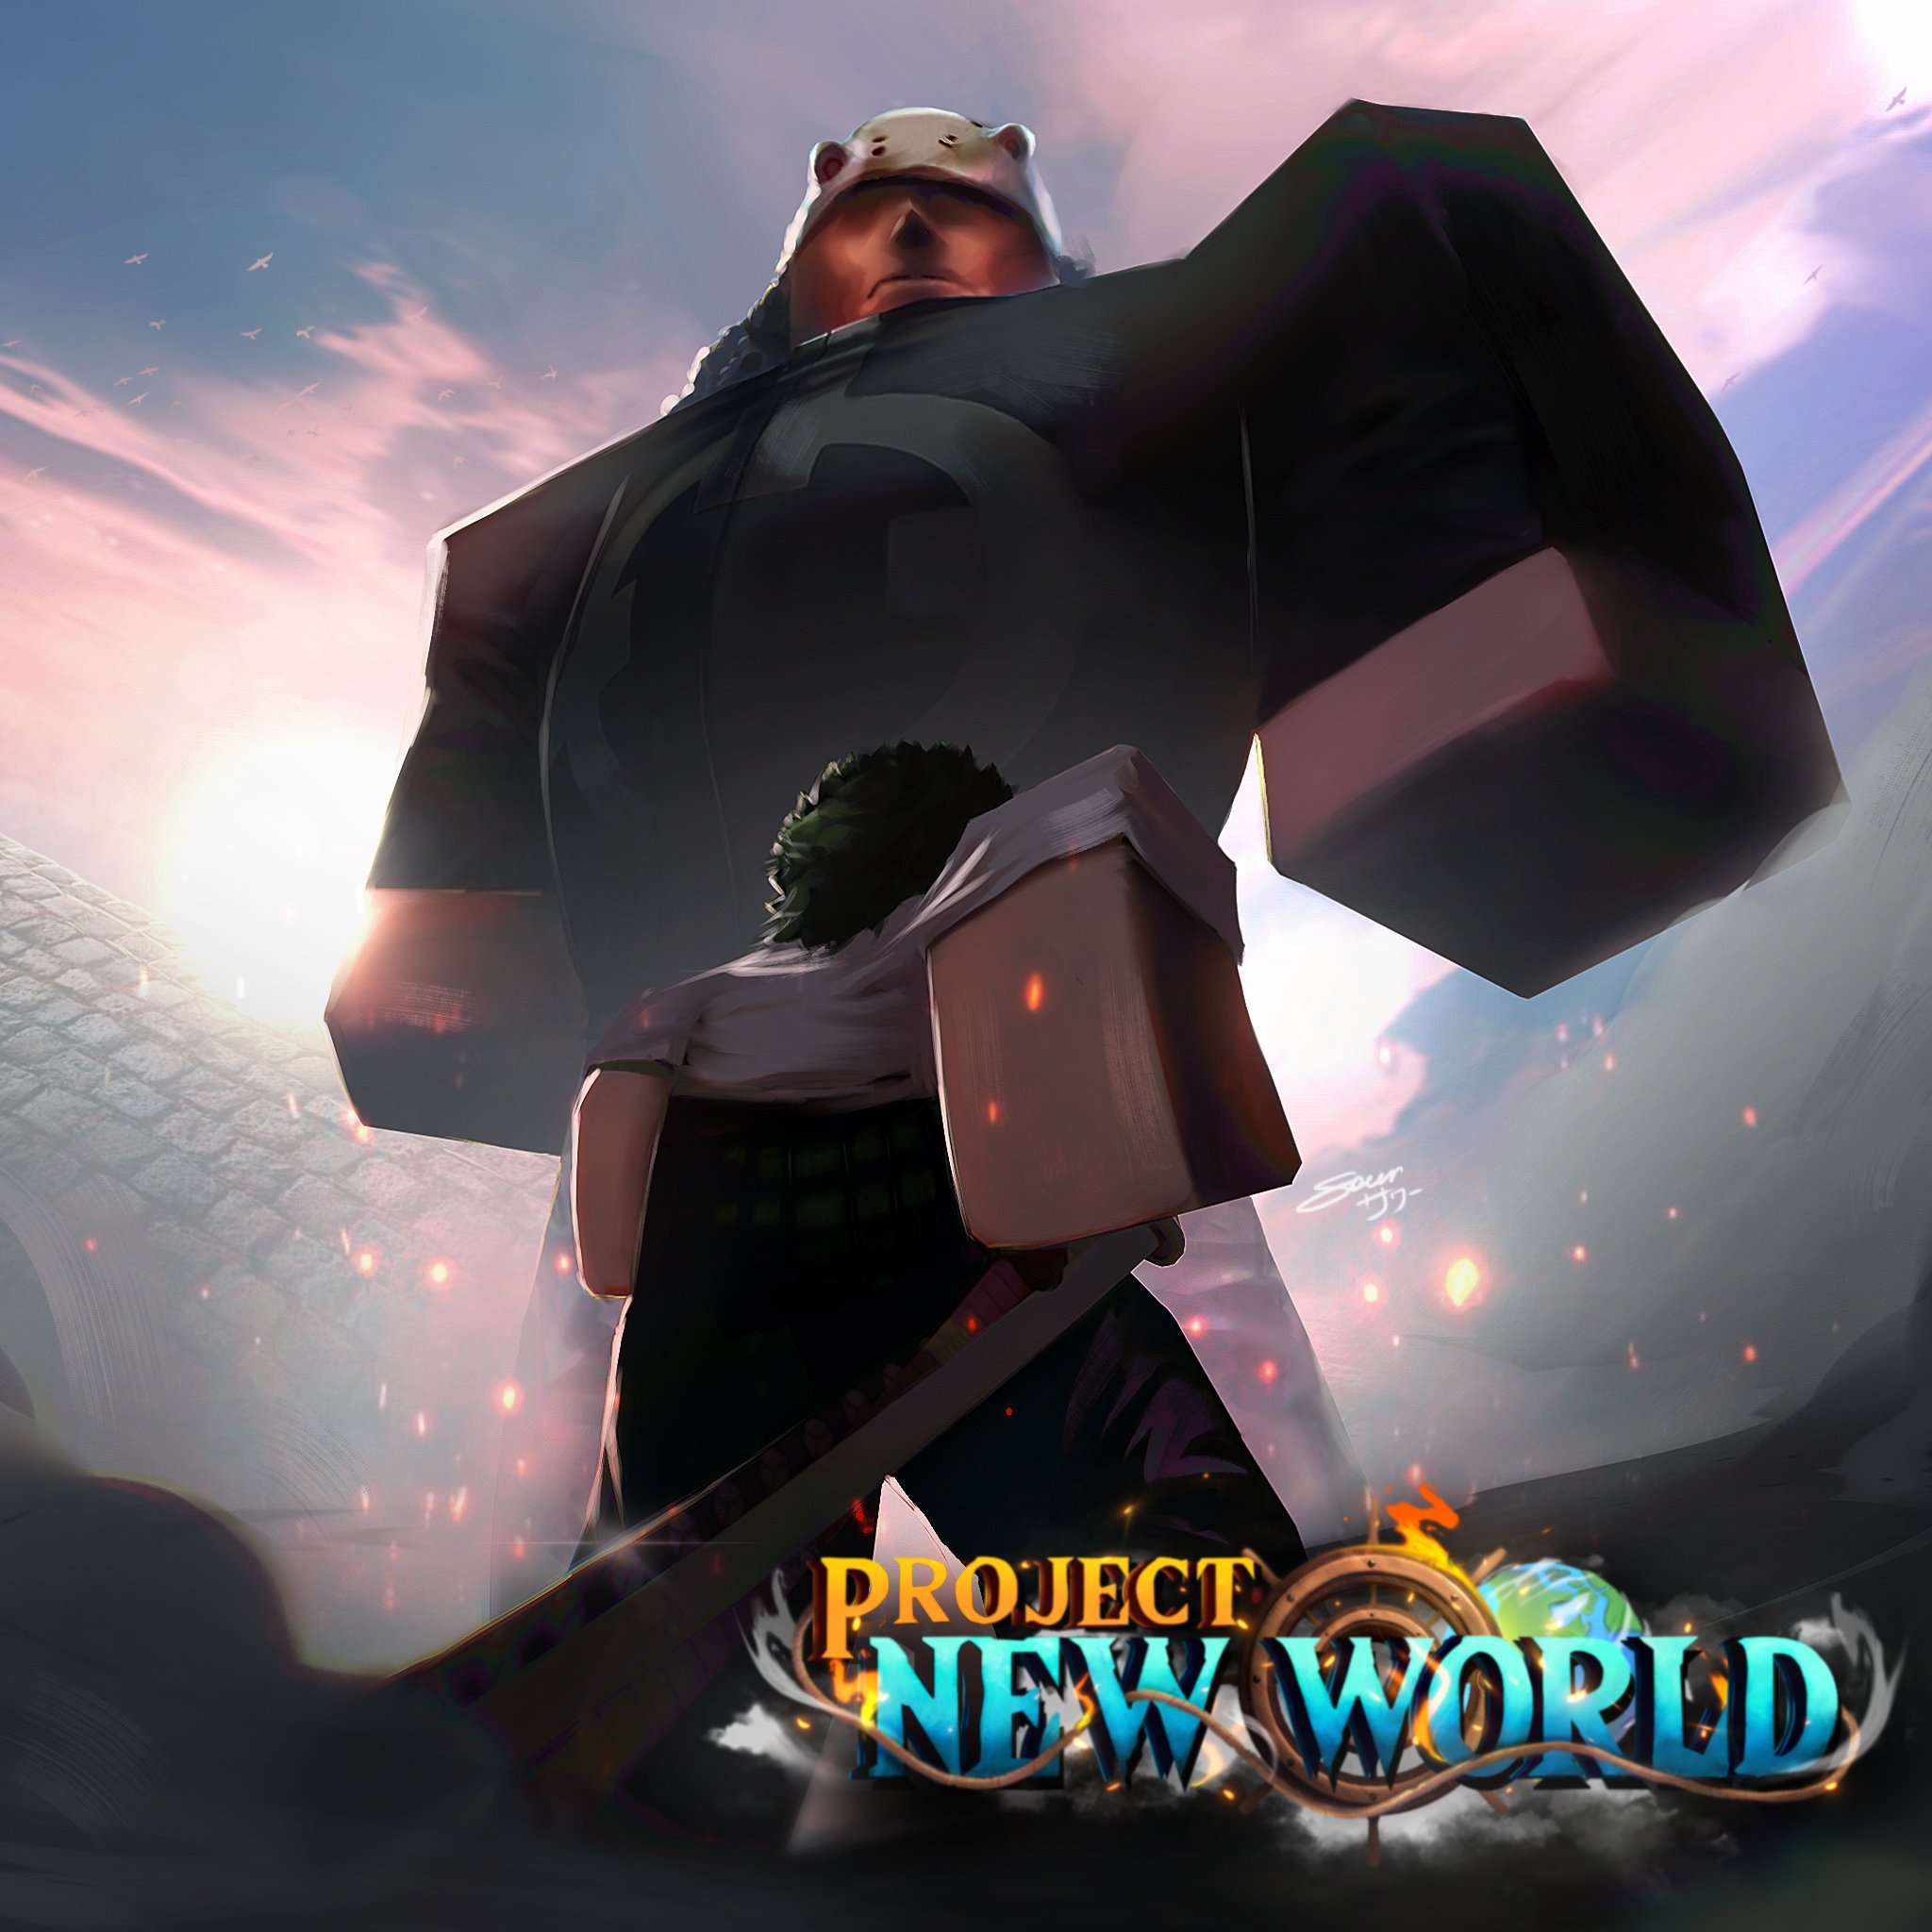 Project New World - Official Trailer 